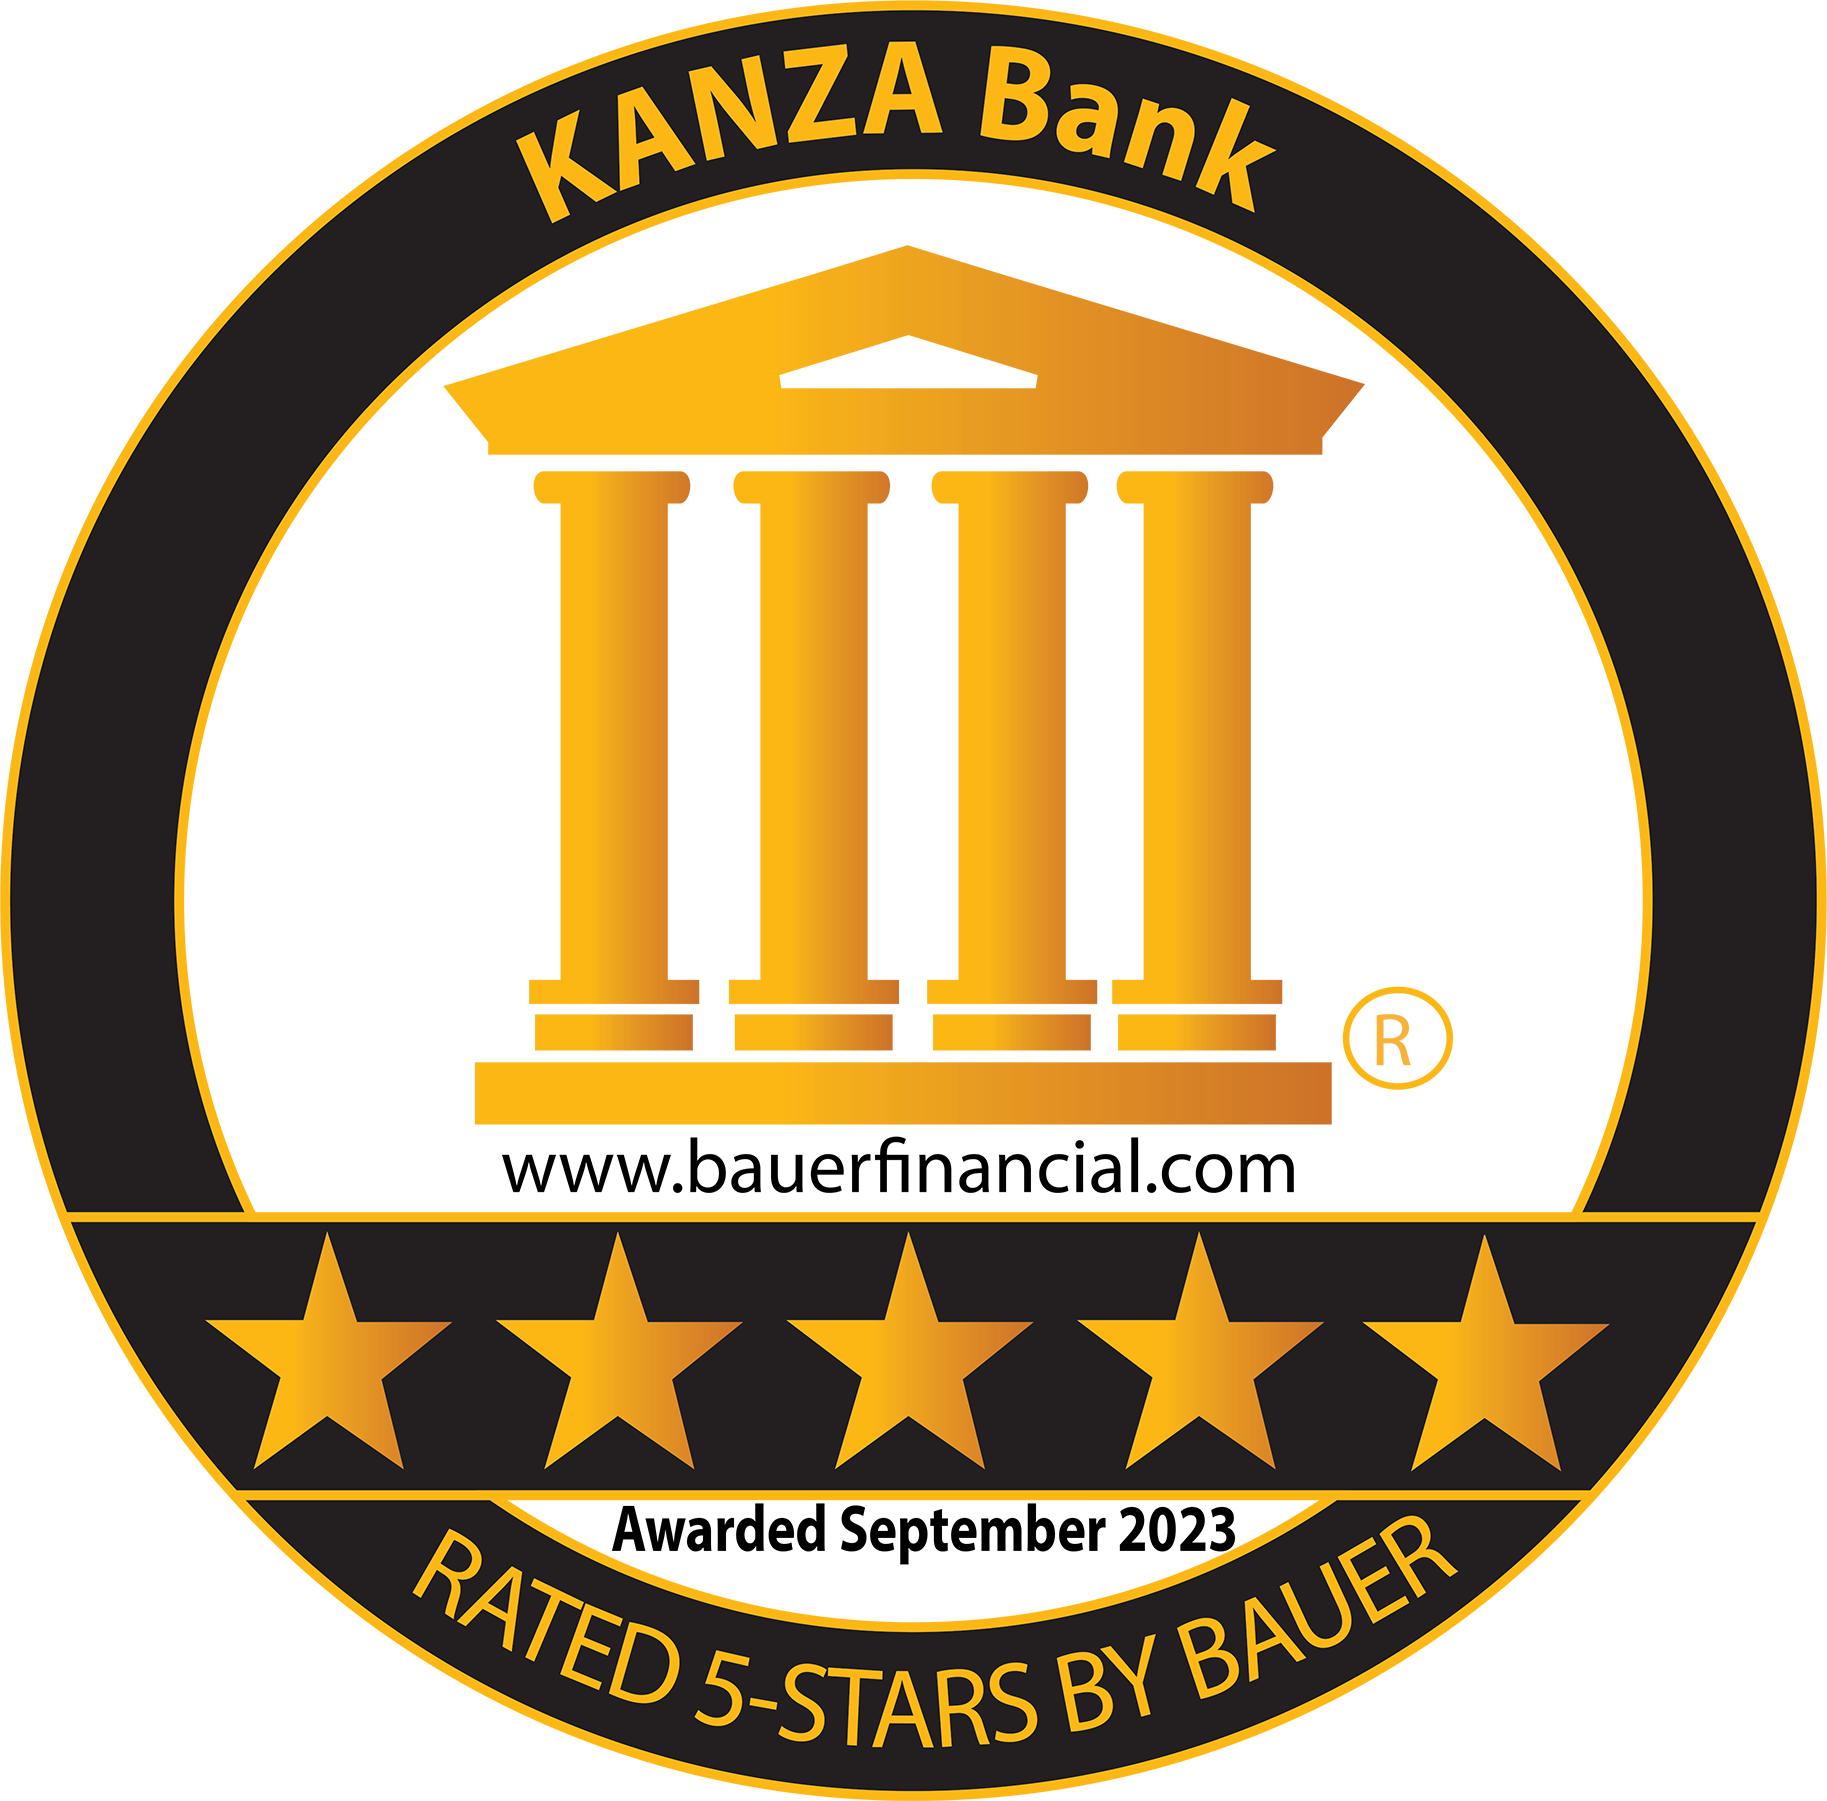 KANZA Bank Earns 5-Star Rating from Bauer Financial Image